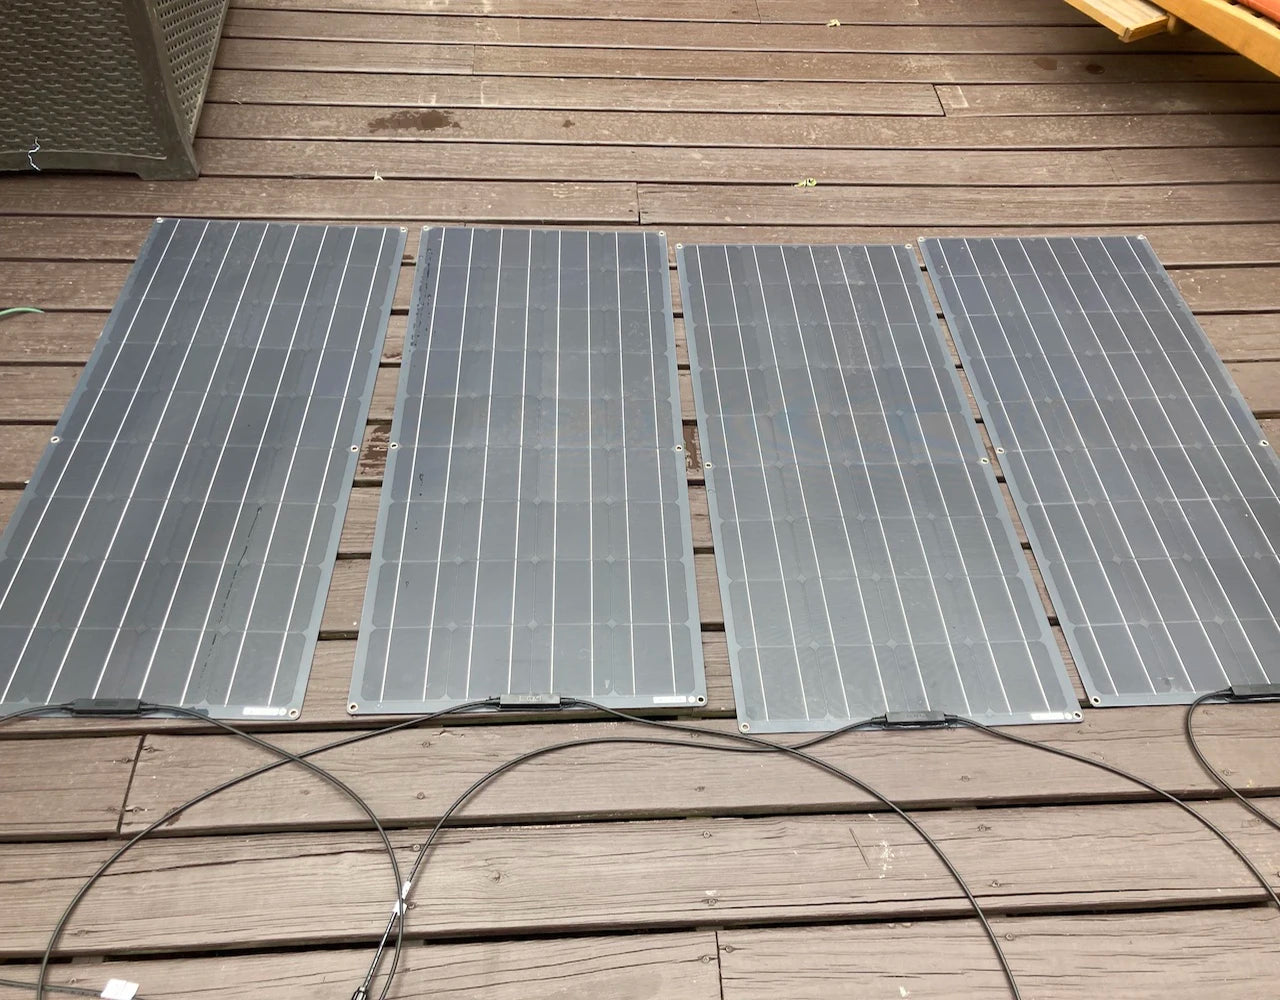 12v solar panel, Clean and quiet solar power system for off-grid use.